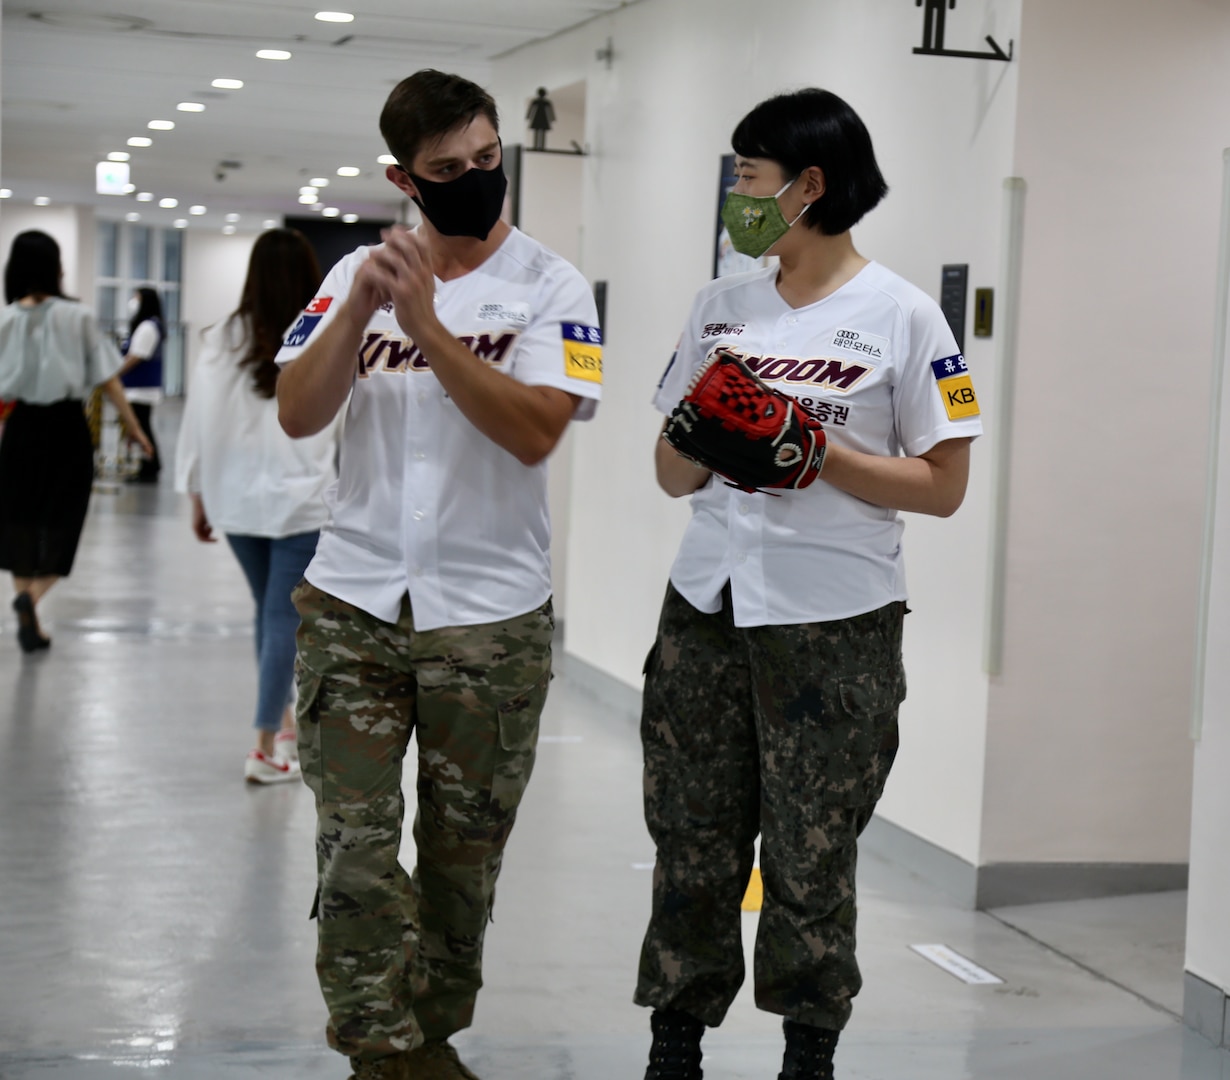 U.S. Army Capt. Miles Garbielson and ROK Army Capt. Ha Neul prepare for their participation in the ceremonial first pitch before South Korea's professional baseball game between the Kiwoom Heroes and the Kia Tigers at Gecheok Sky Dome on June 25, 2021.